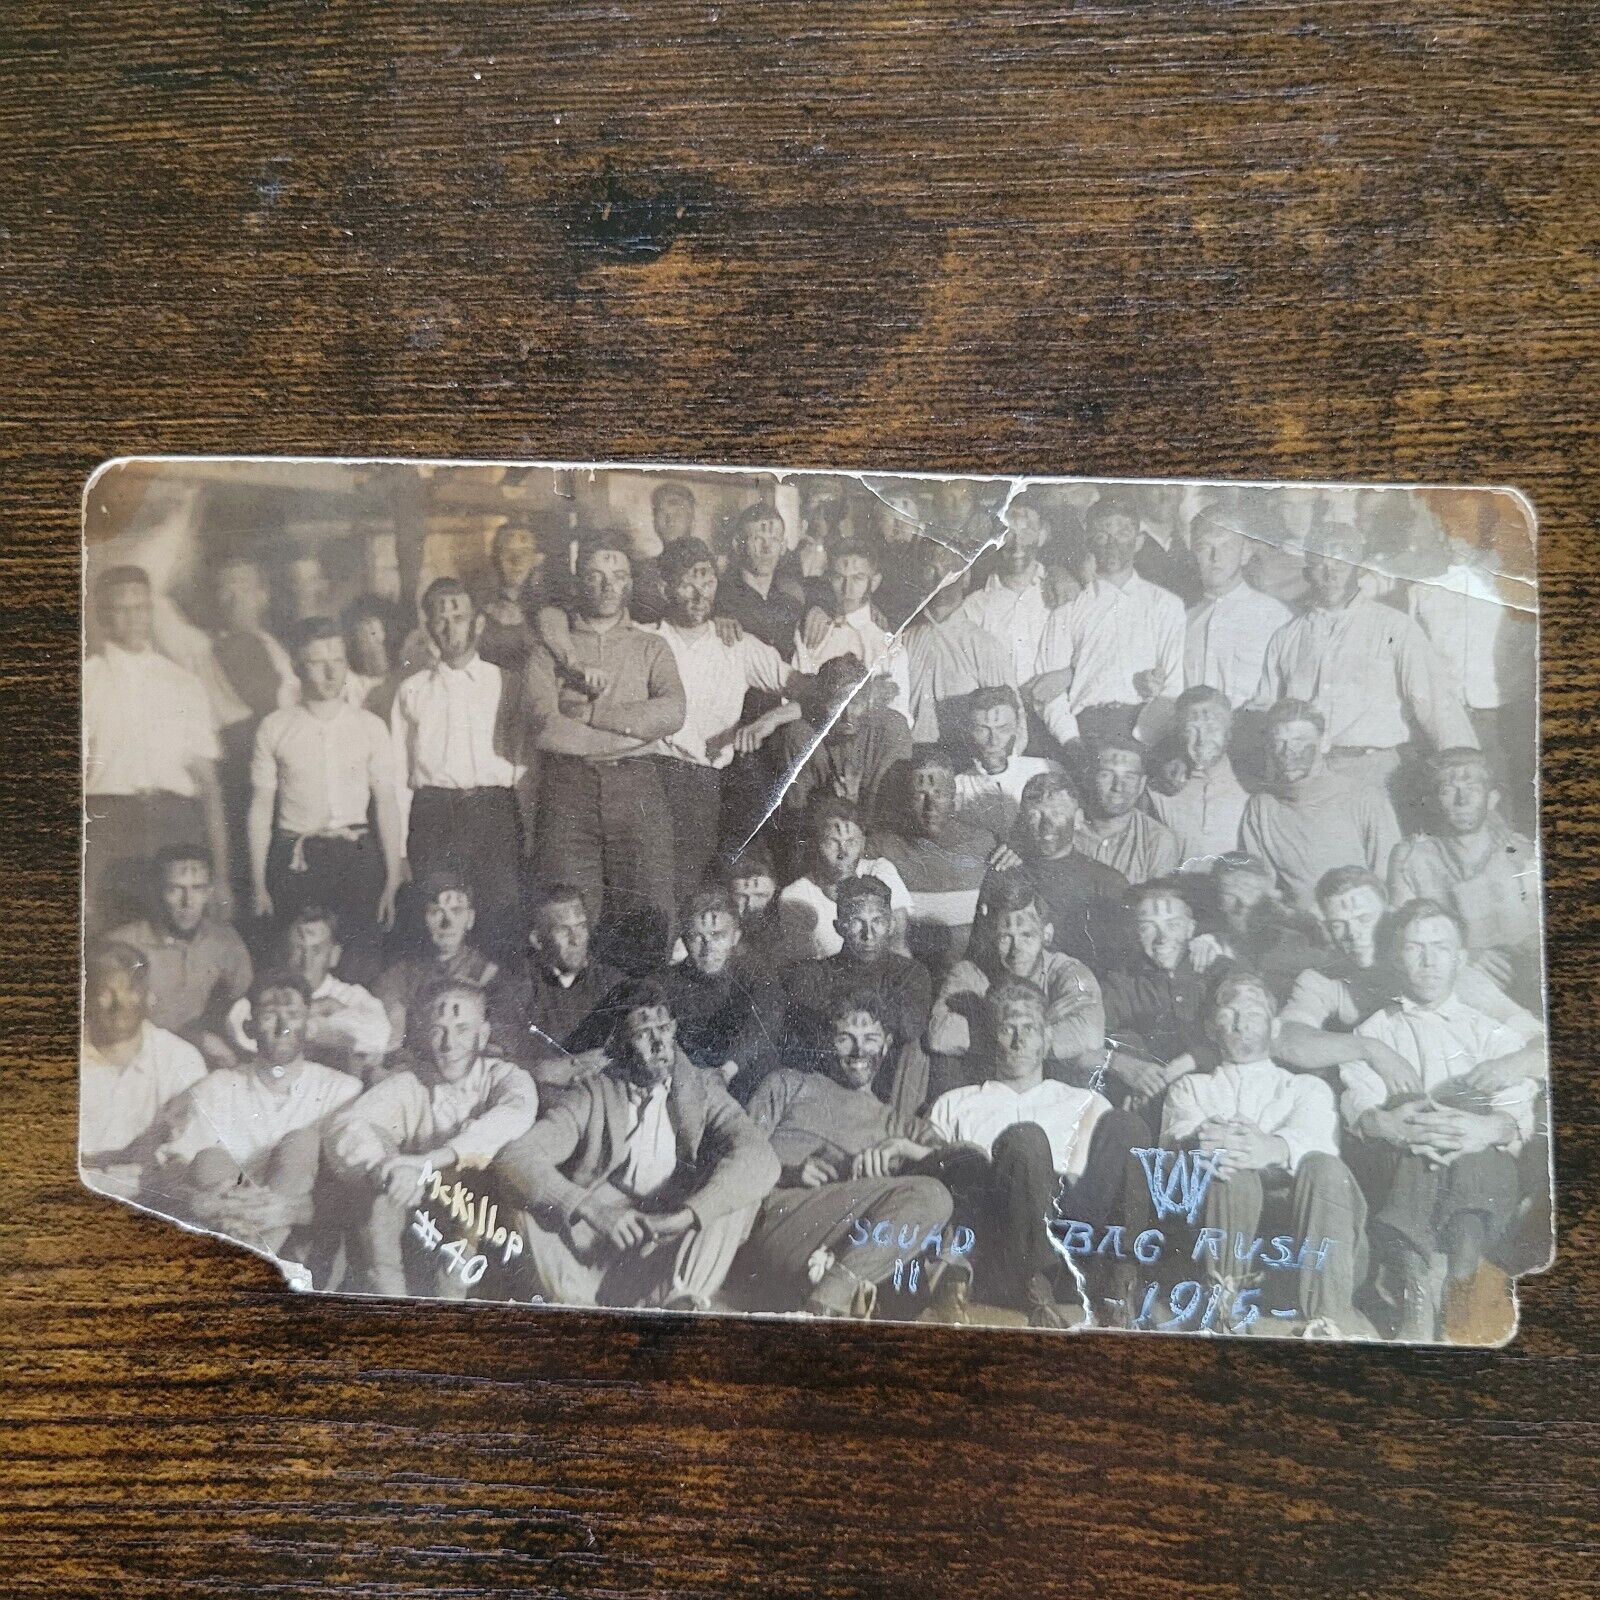 Students at University of Wisconsin Madison Bag Rush Squad 1915 Real Photo RPPC